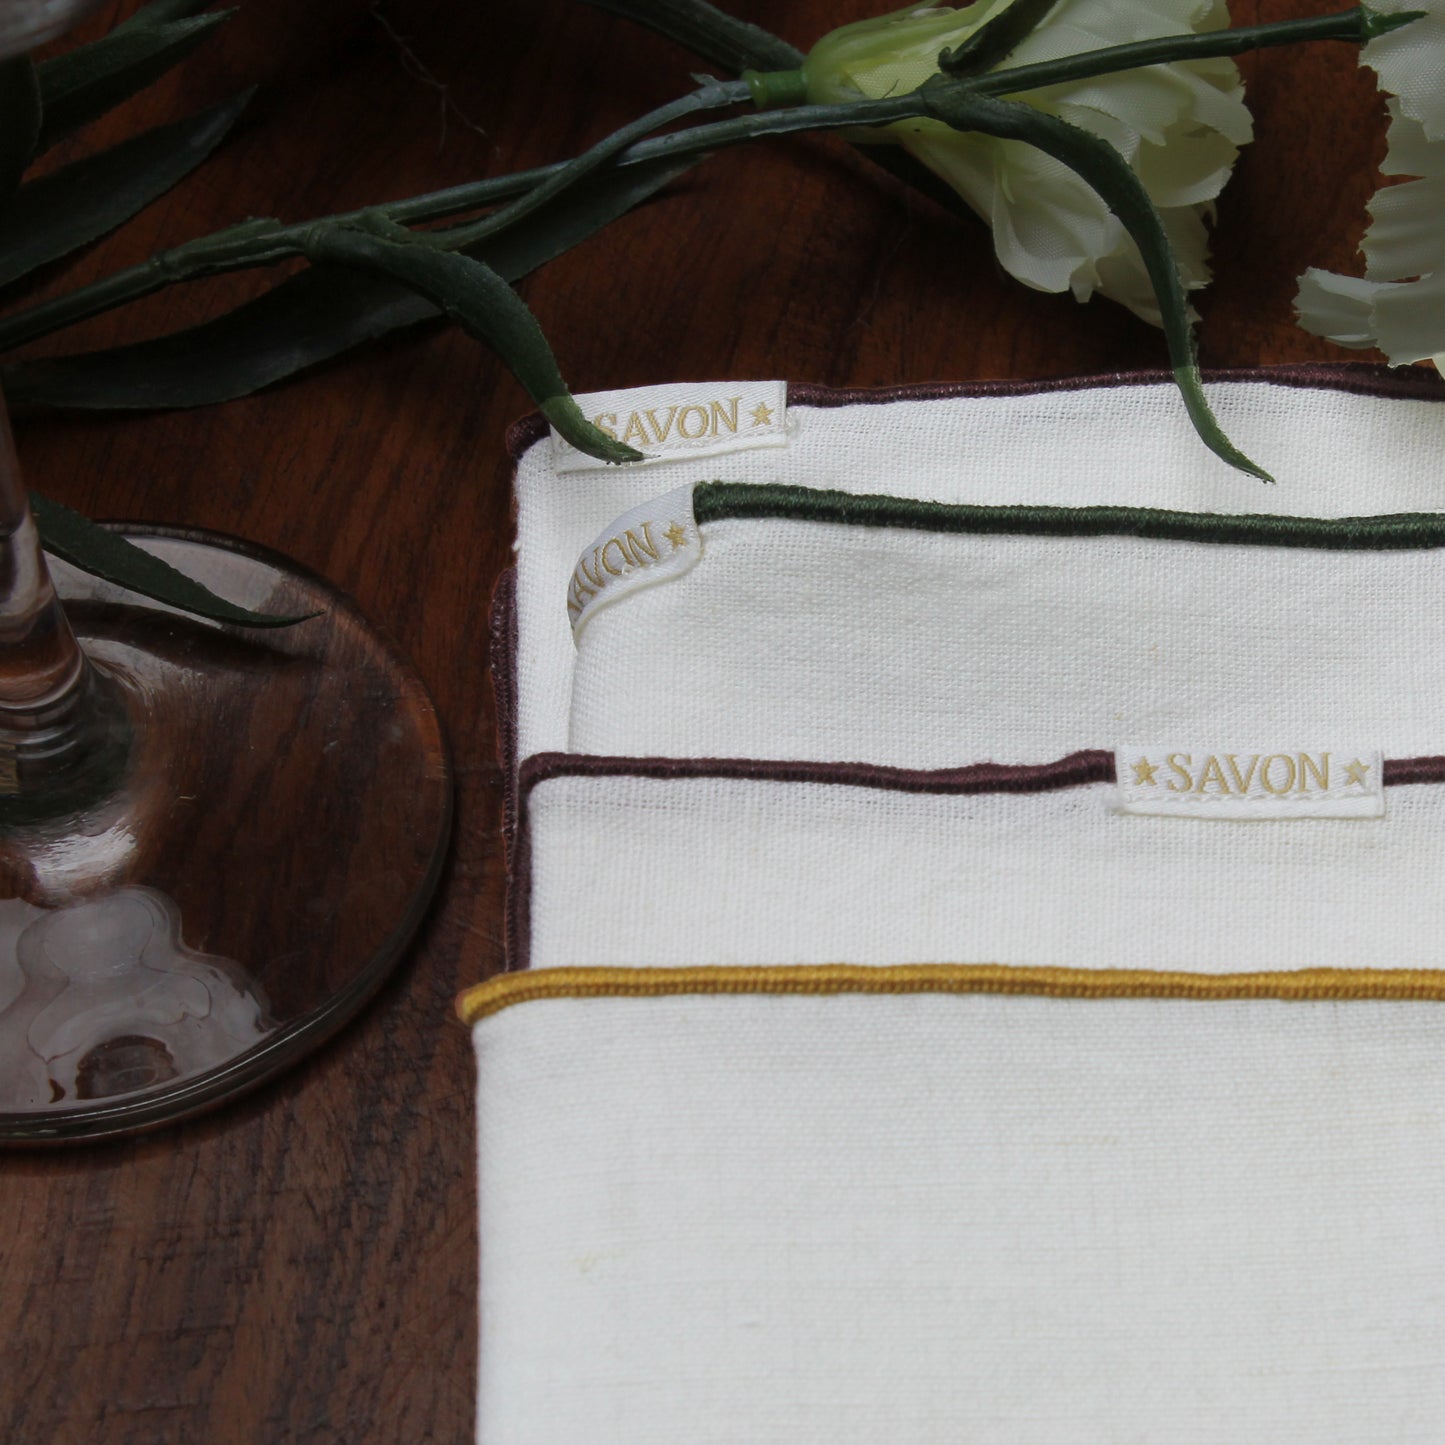 Cotton Cloth Table Napkin White 18x18 inch with Colored Border Trim Set of 8 Gold Green Brown Coffee